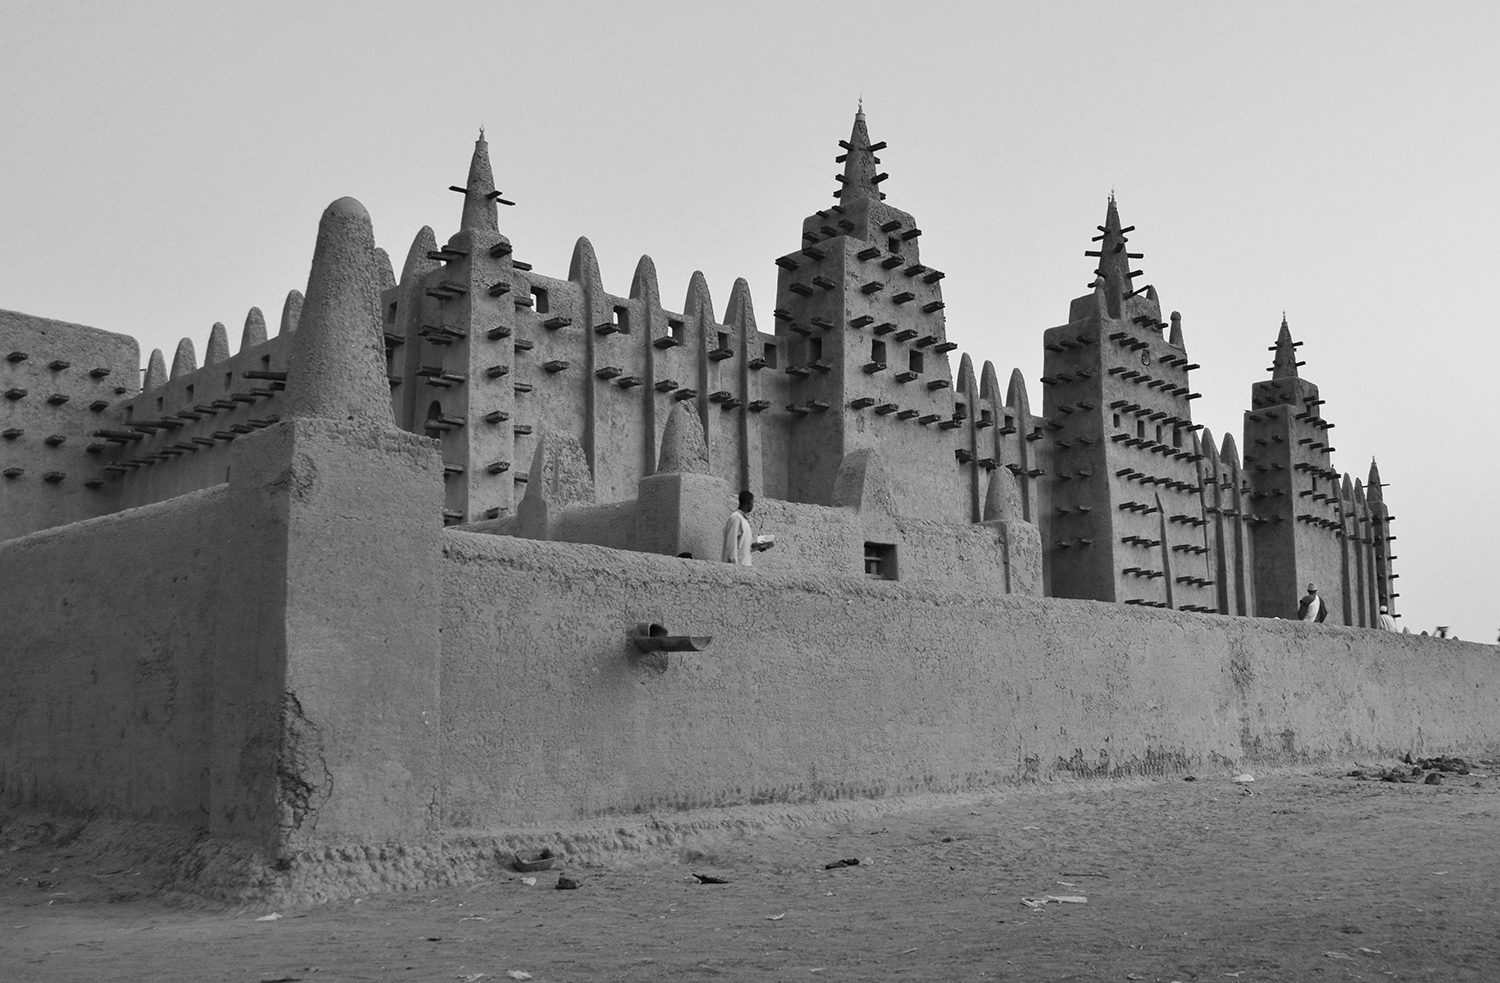 Every year, residents of Djenne town work together to re-surface the iconic mud mosque. This was the calm before the storm of activity early in the morning, showing the mosque empty of workers.